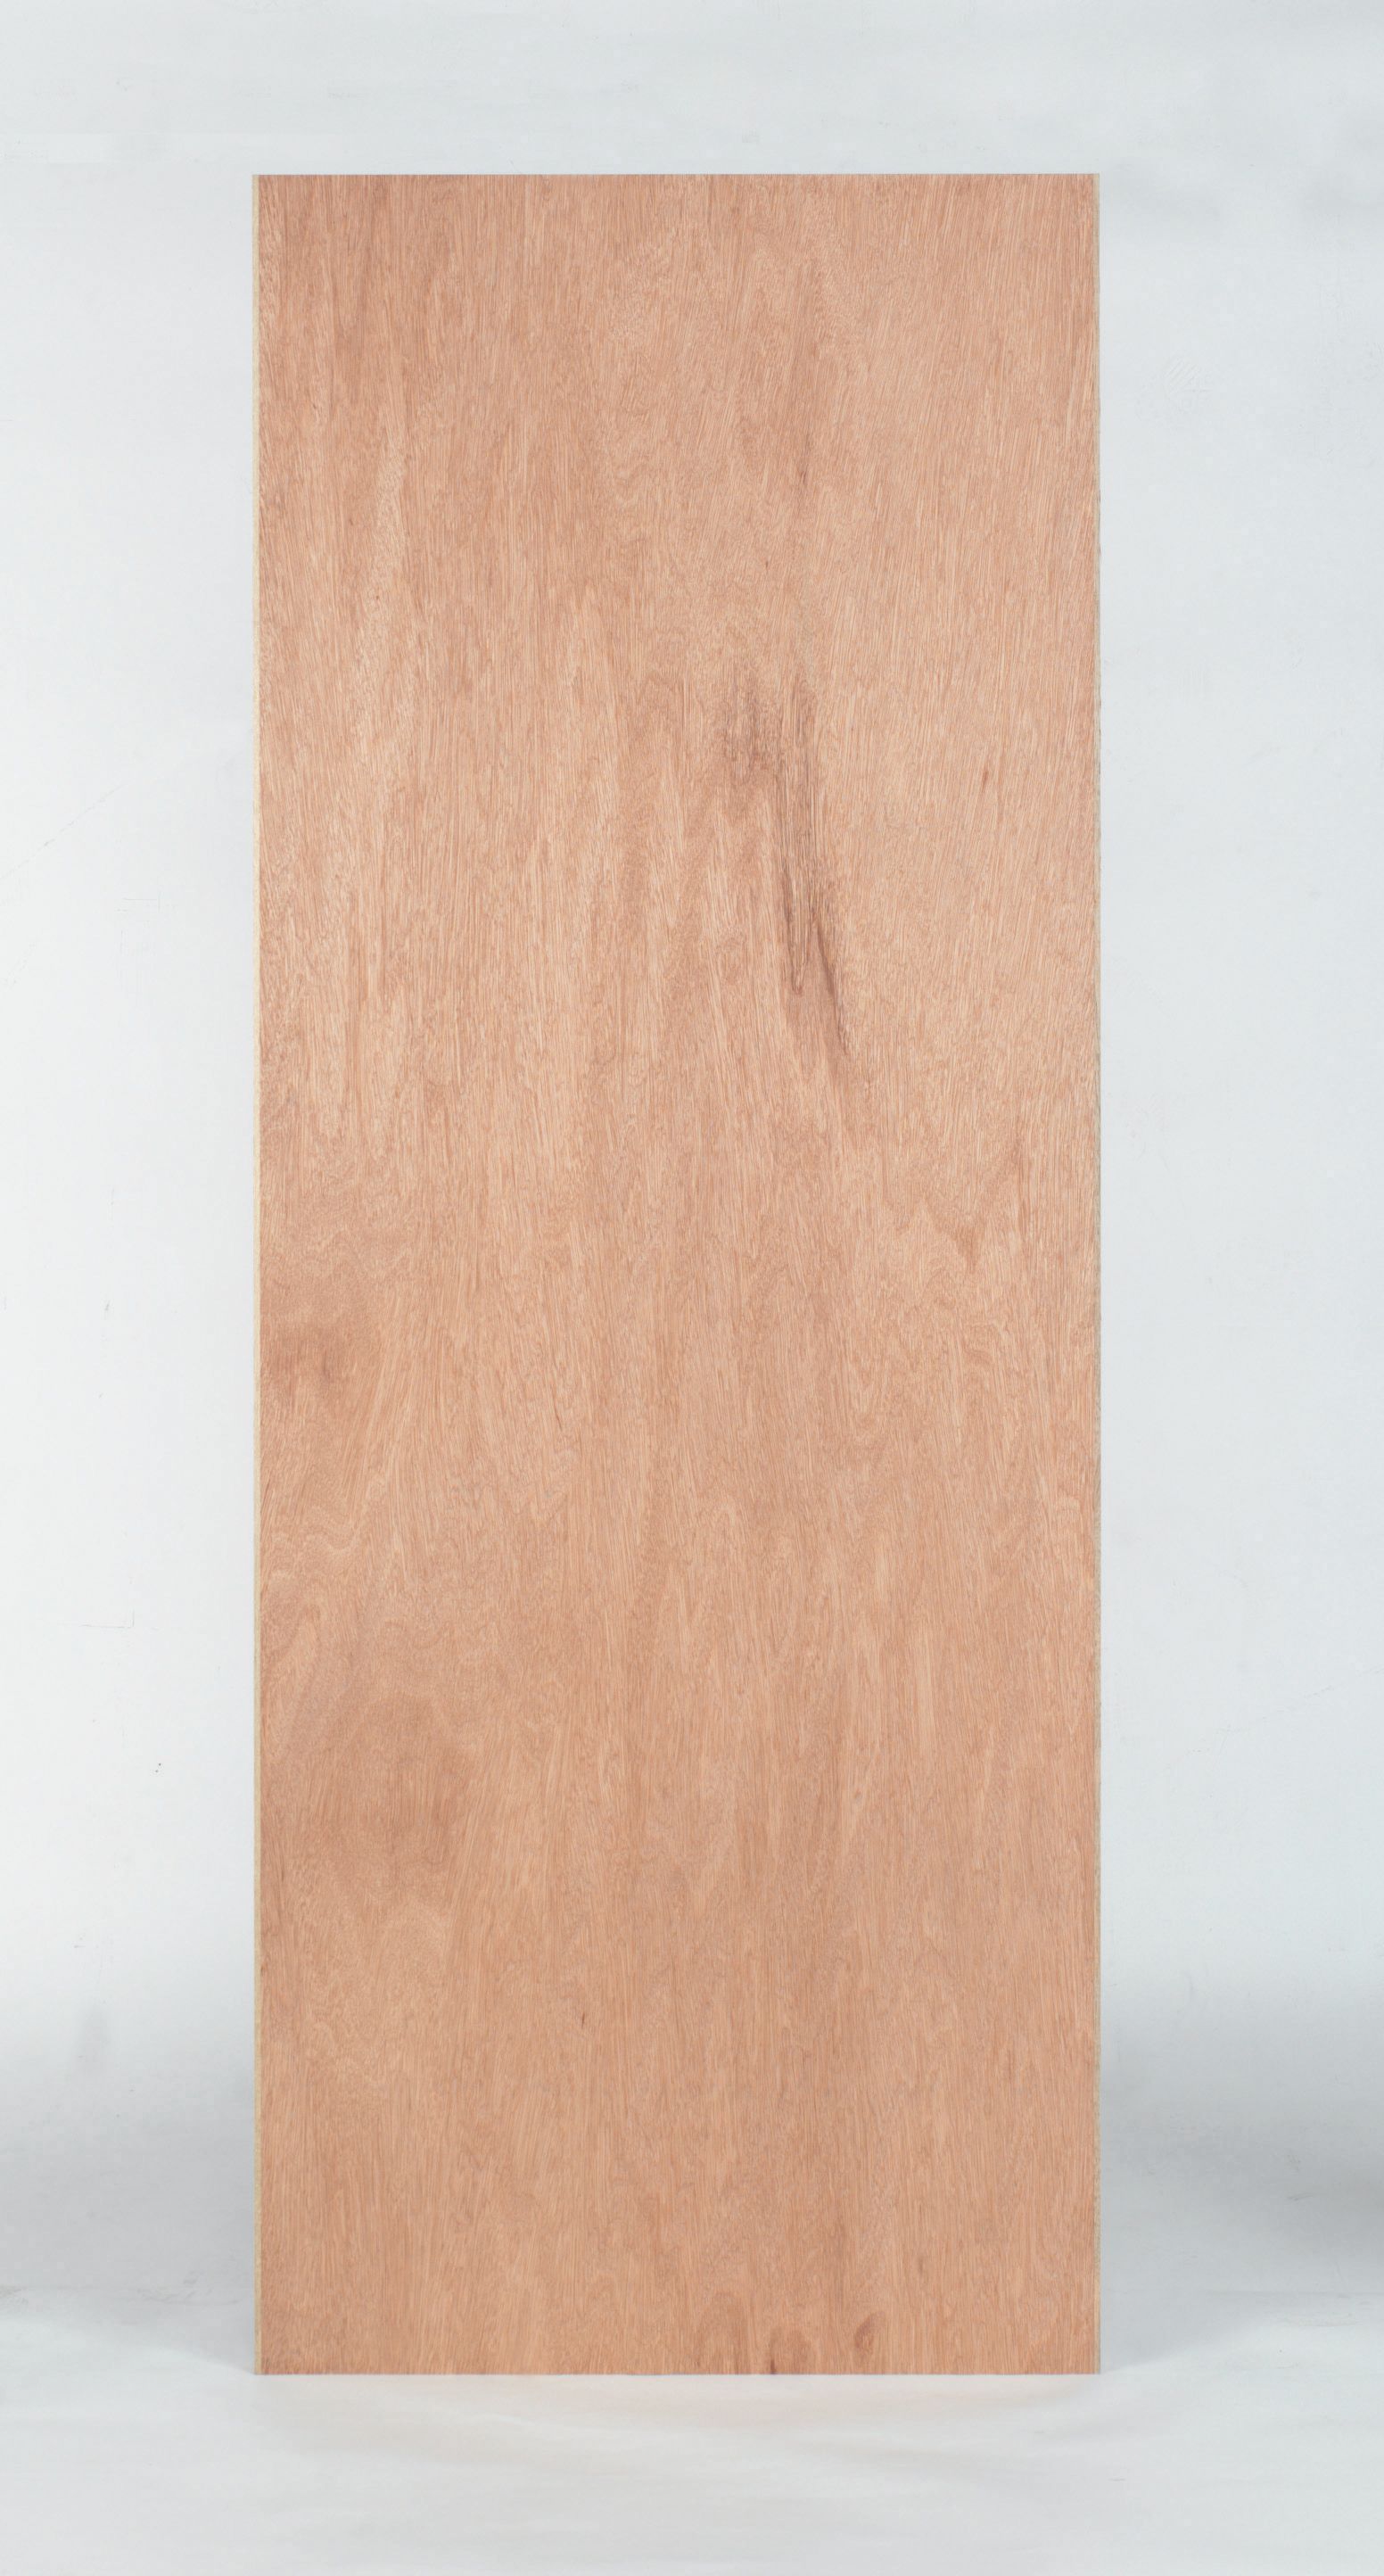 Image of Wickes Lisburn Plywood Flushed 1 Panel Intenal Door - 1981 x 610mm